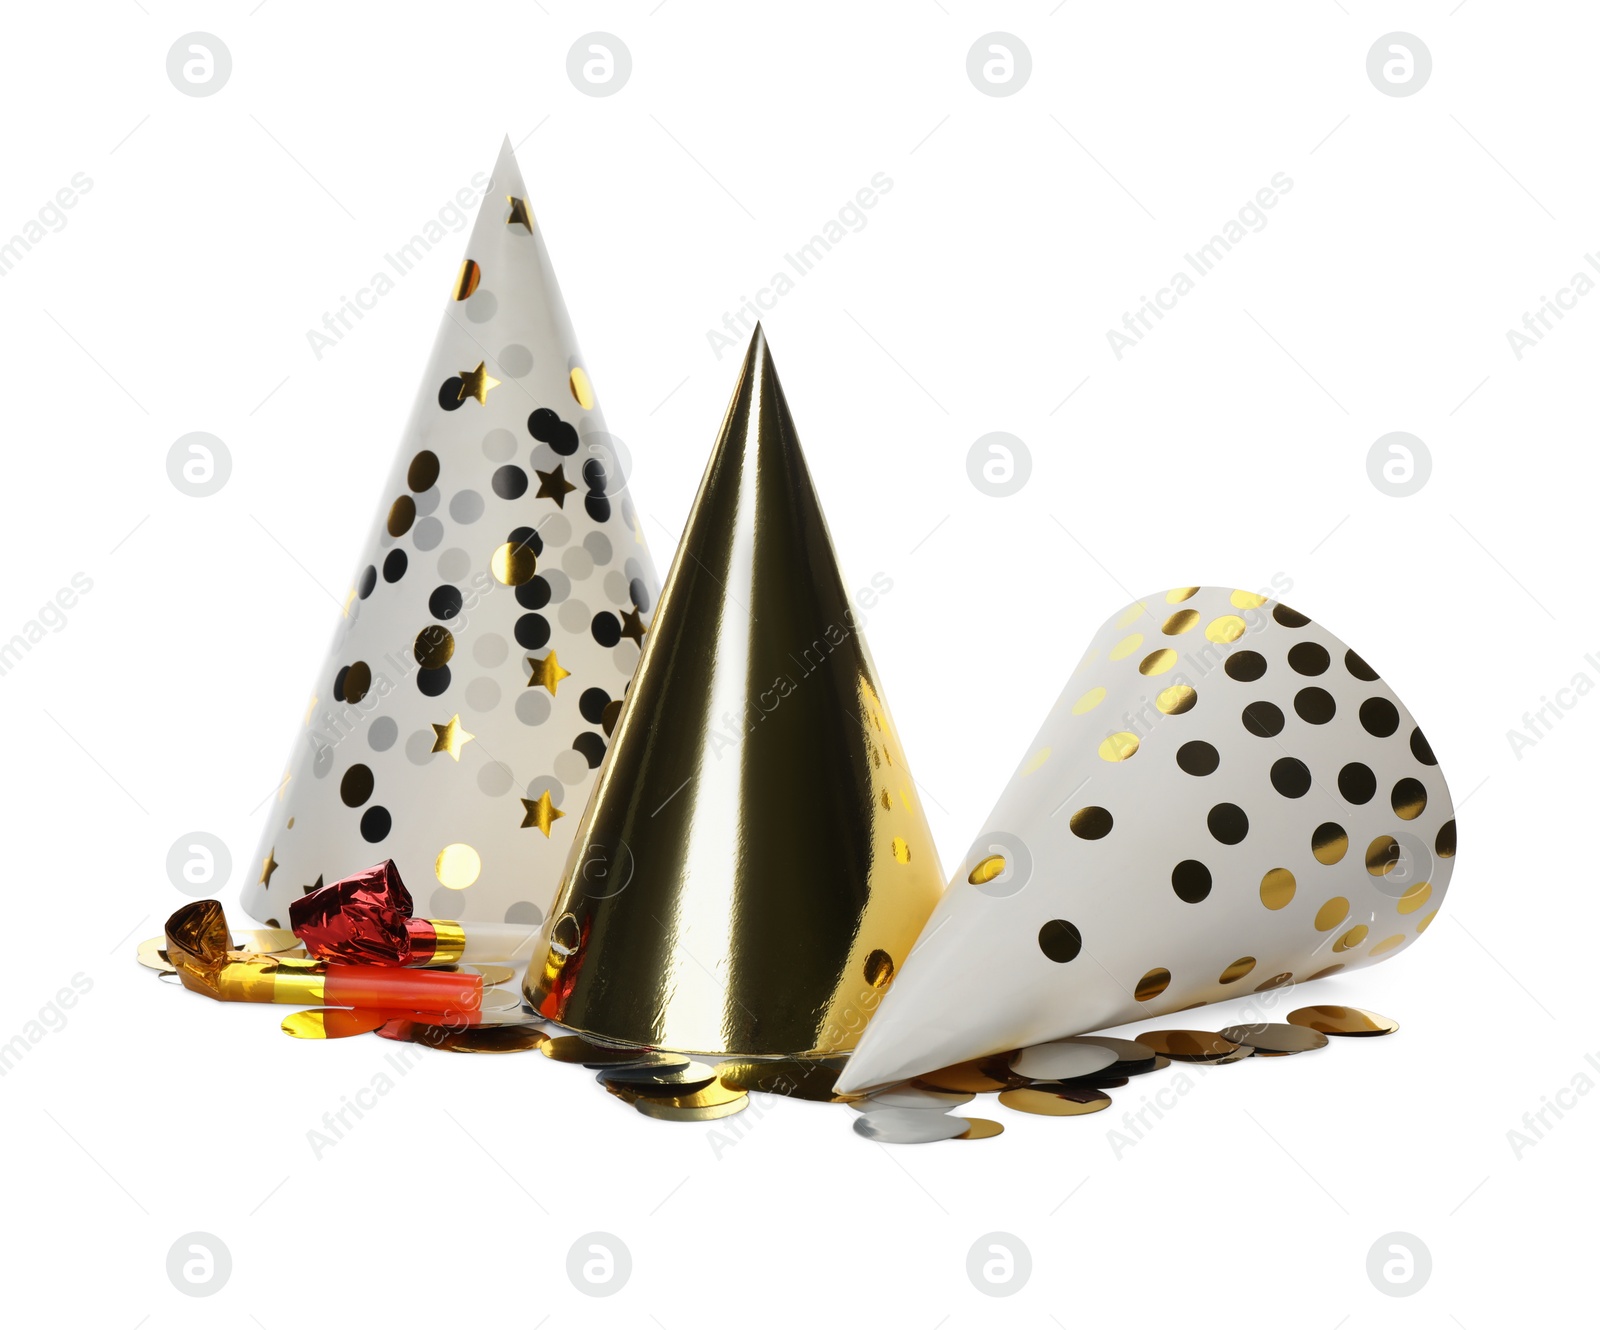 Photo of Colorful party hats and other festive items on white background